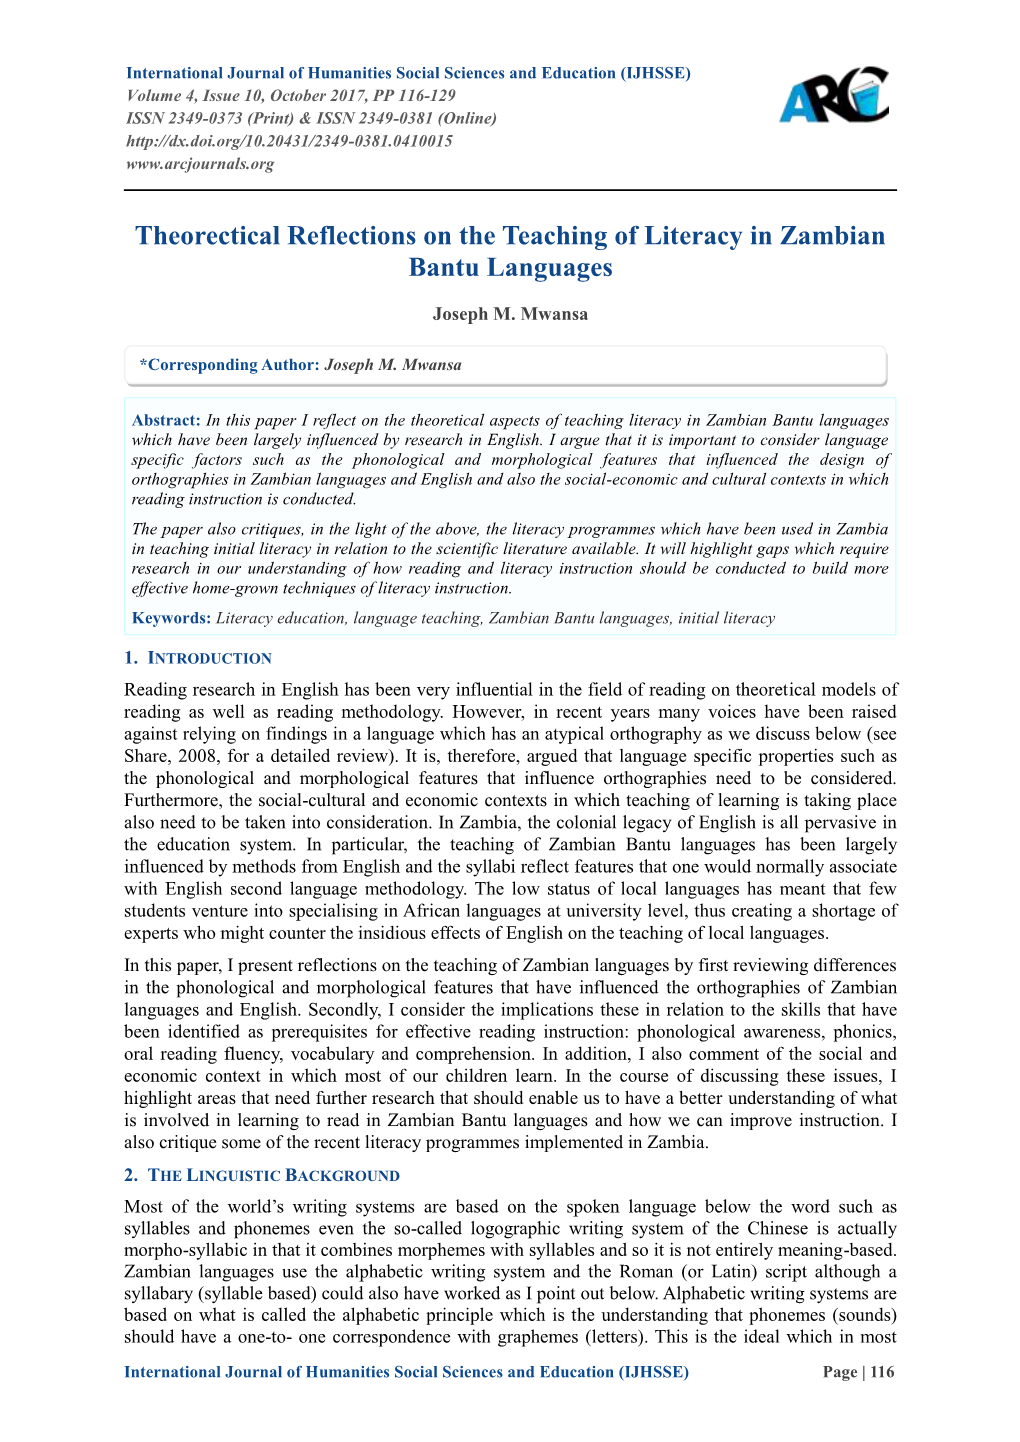 Theorectical Reflections on the Teaching of Literacy in Zambian Bantu Languages